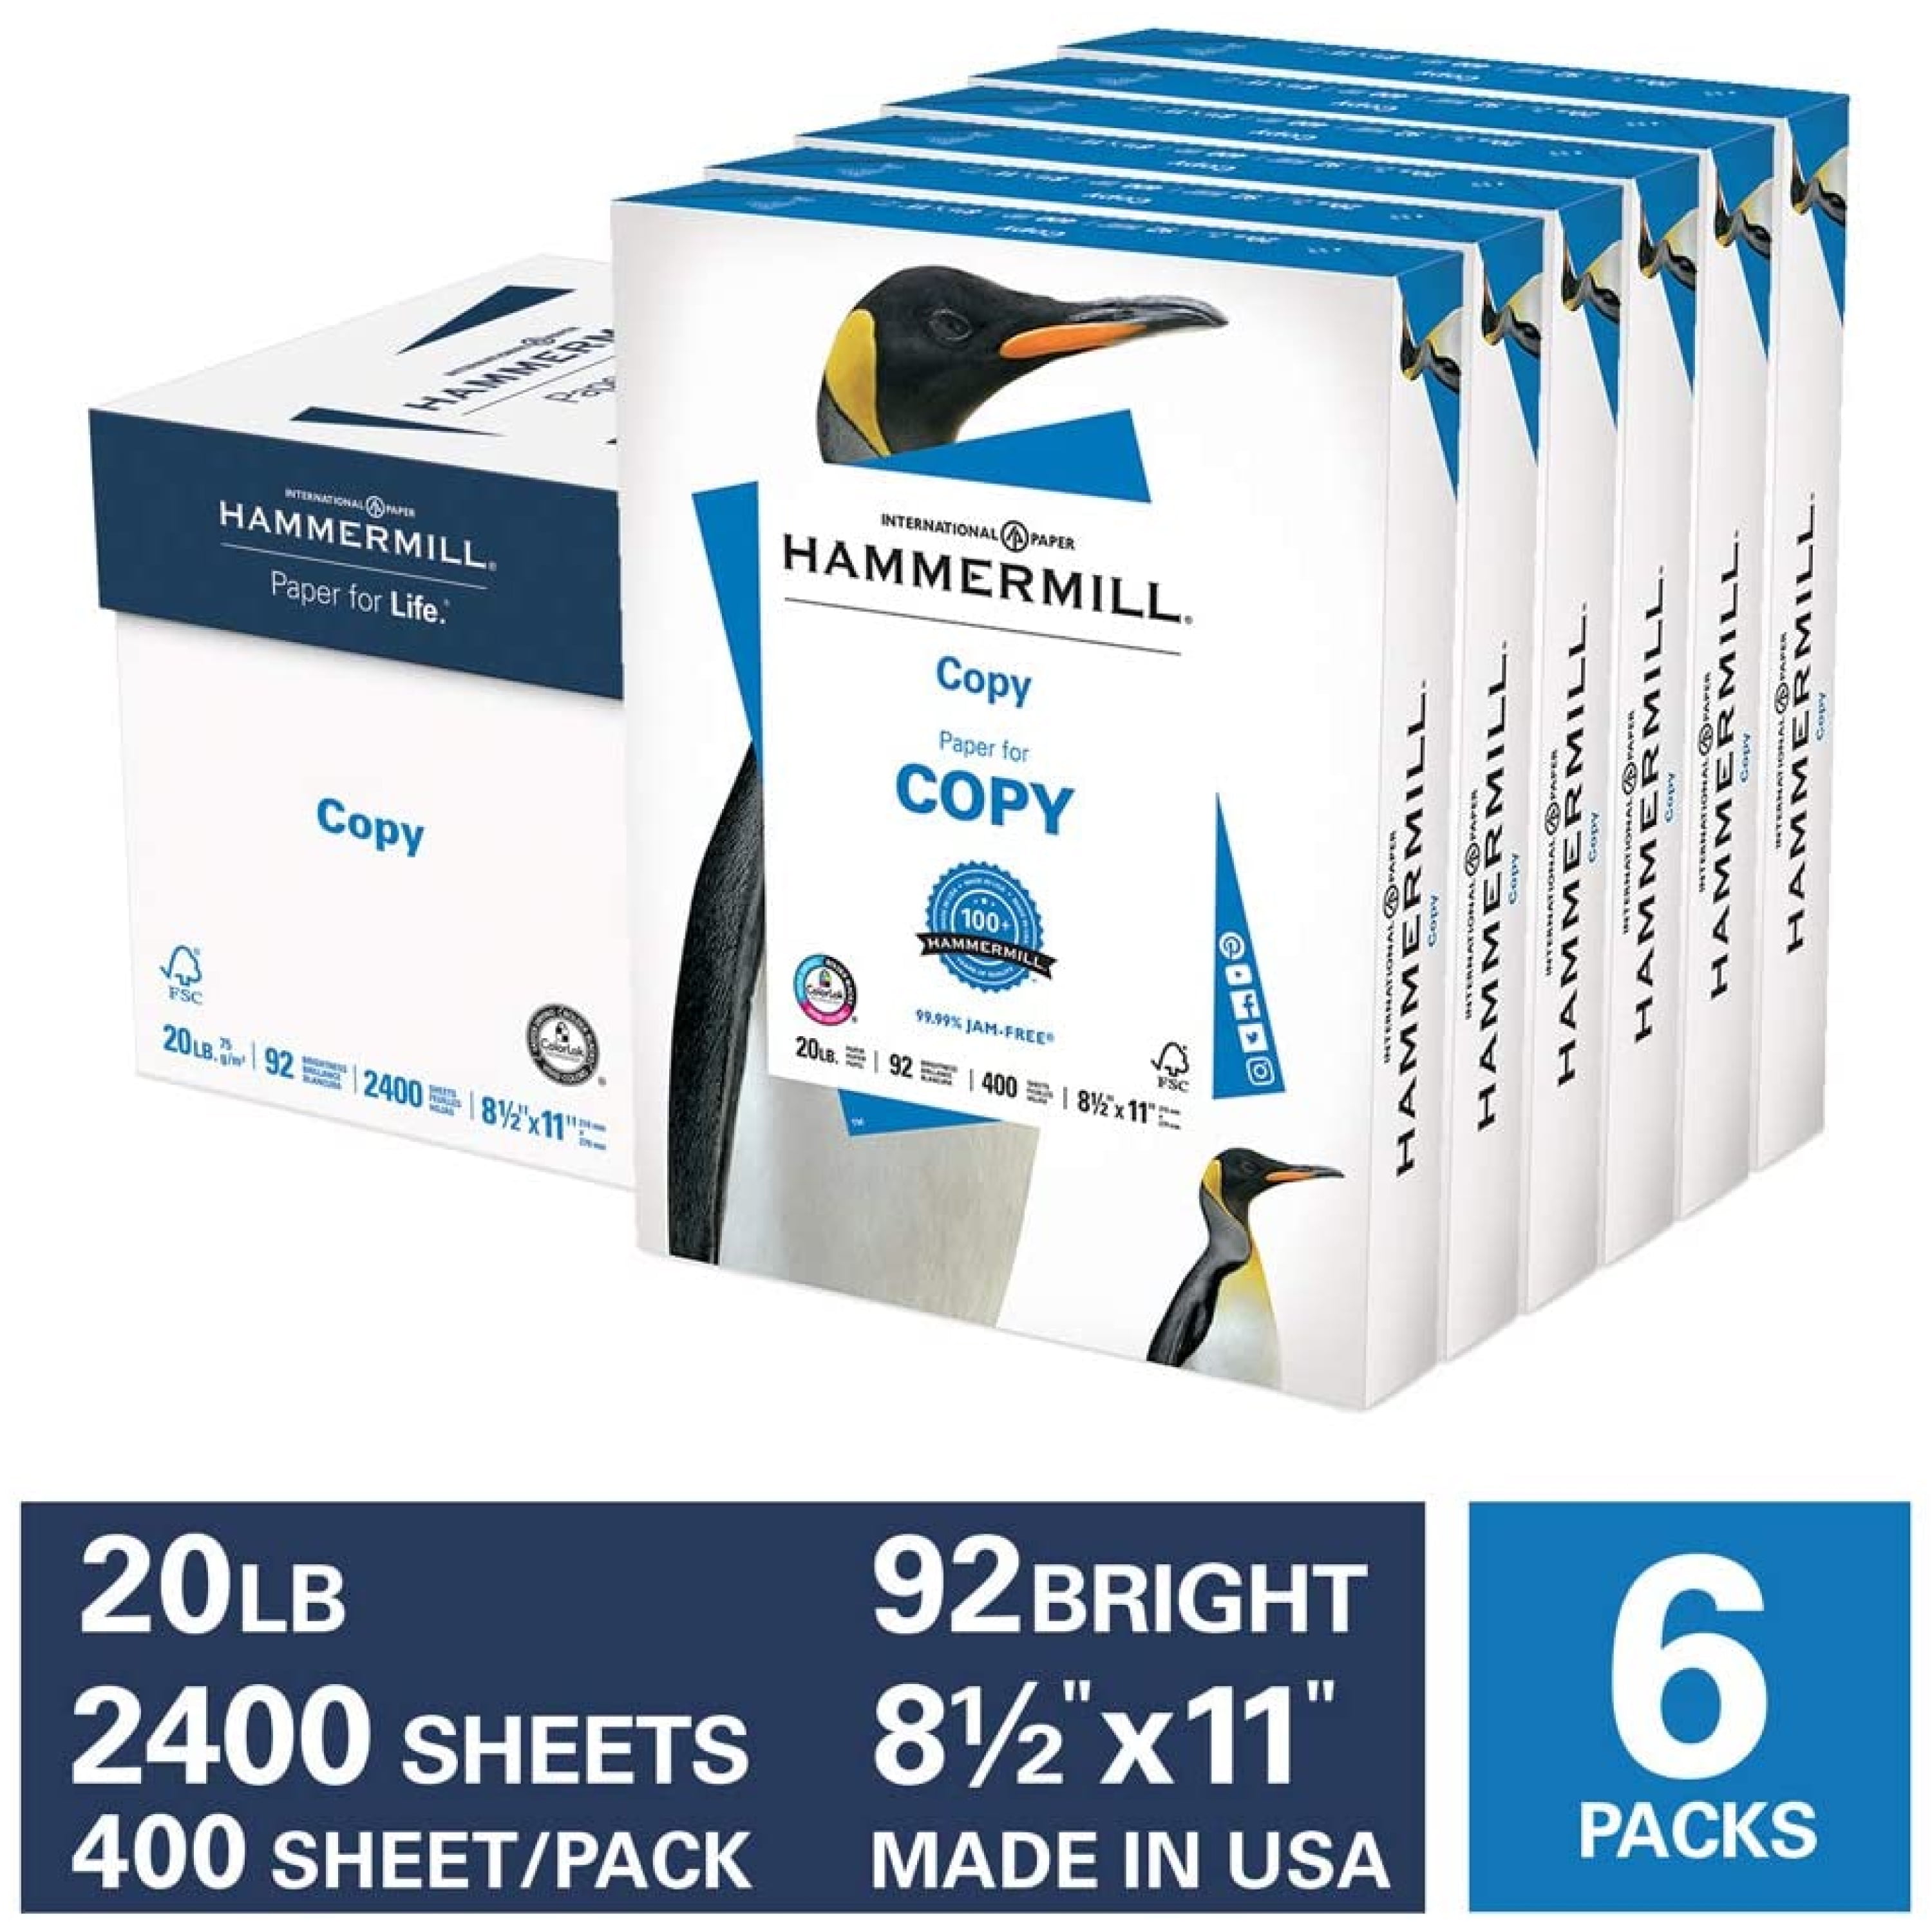  Hammermill Printer Paper, 20 lb Copy Paper, 8.5 x 11 - 4 Bulk  Packs (3000 Sheets) - 92 Bright, Made in the USA : Office Products